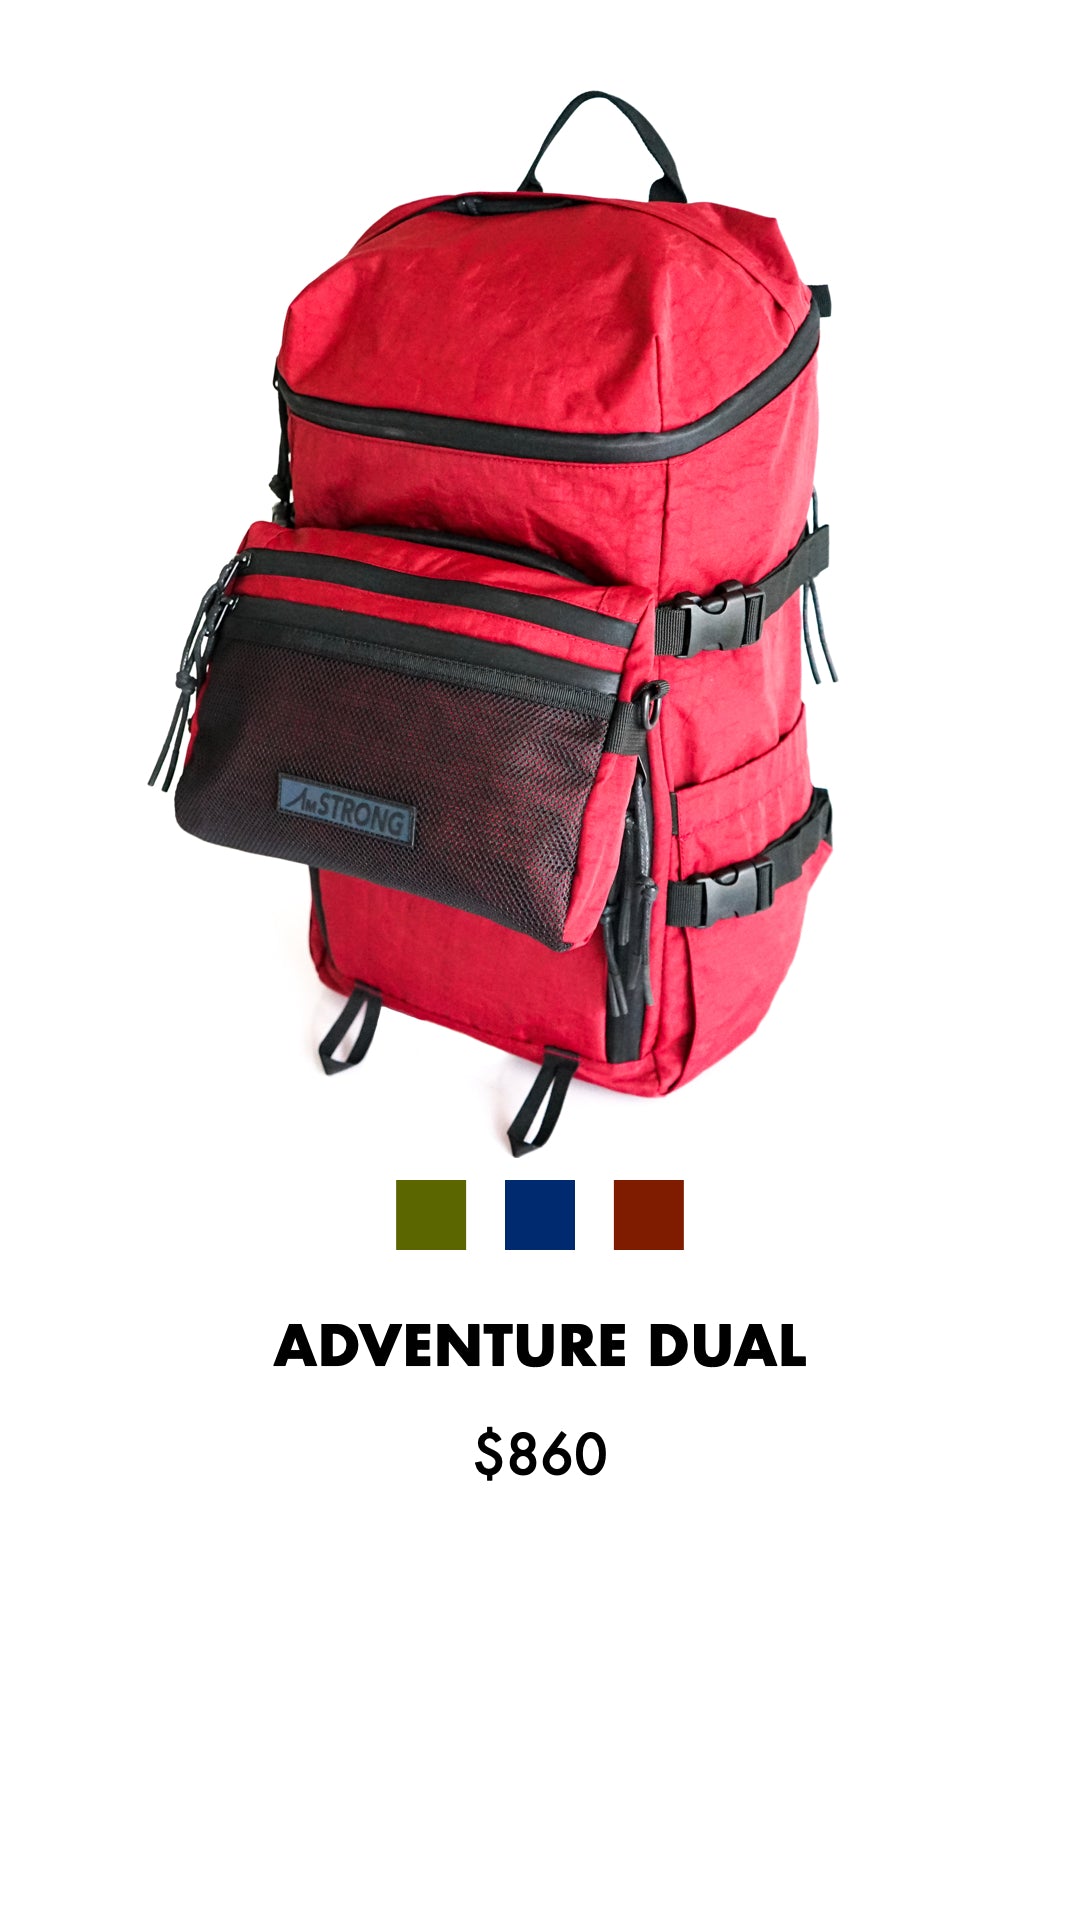 AmSTRONG | ADVENTURE DUAL